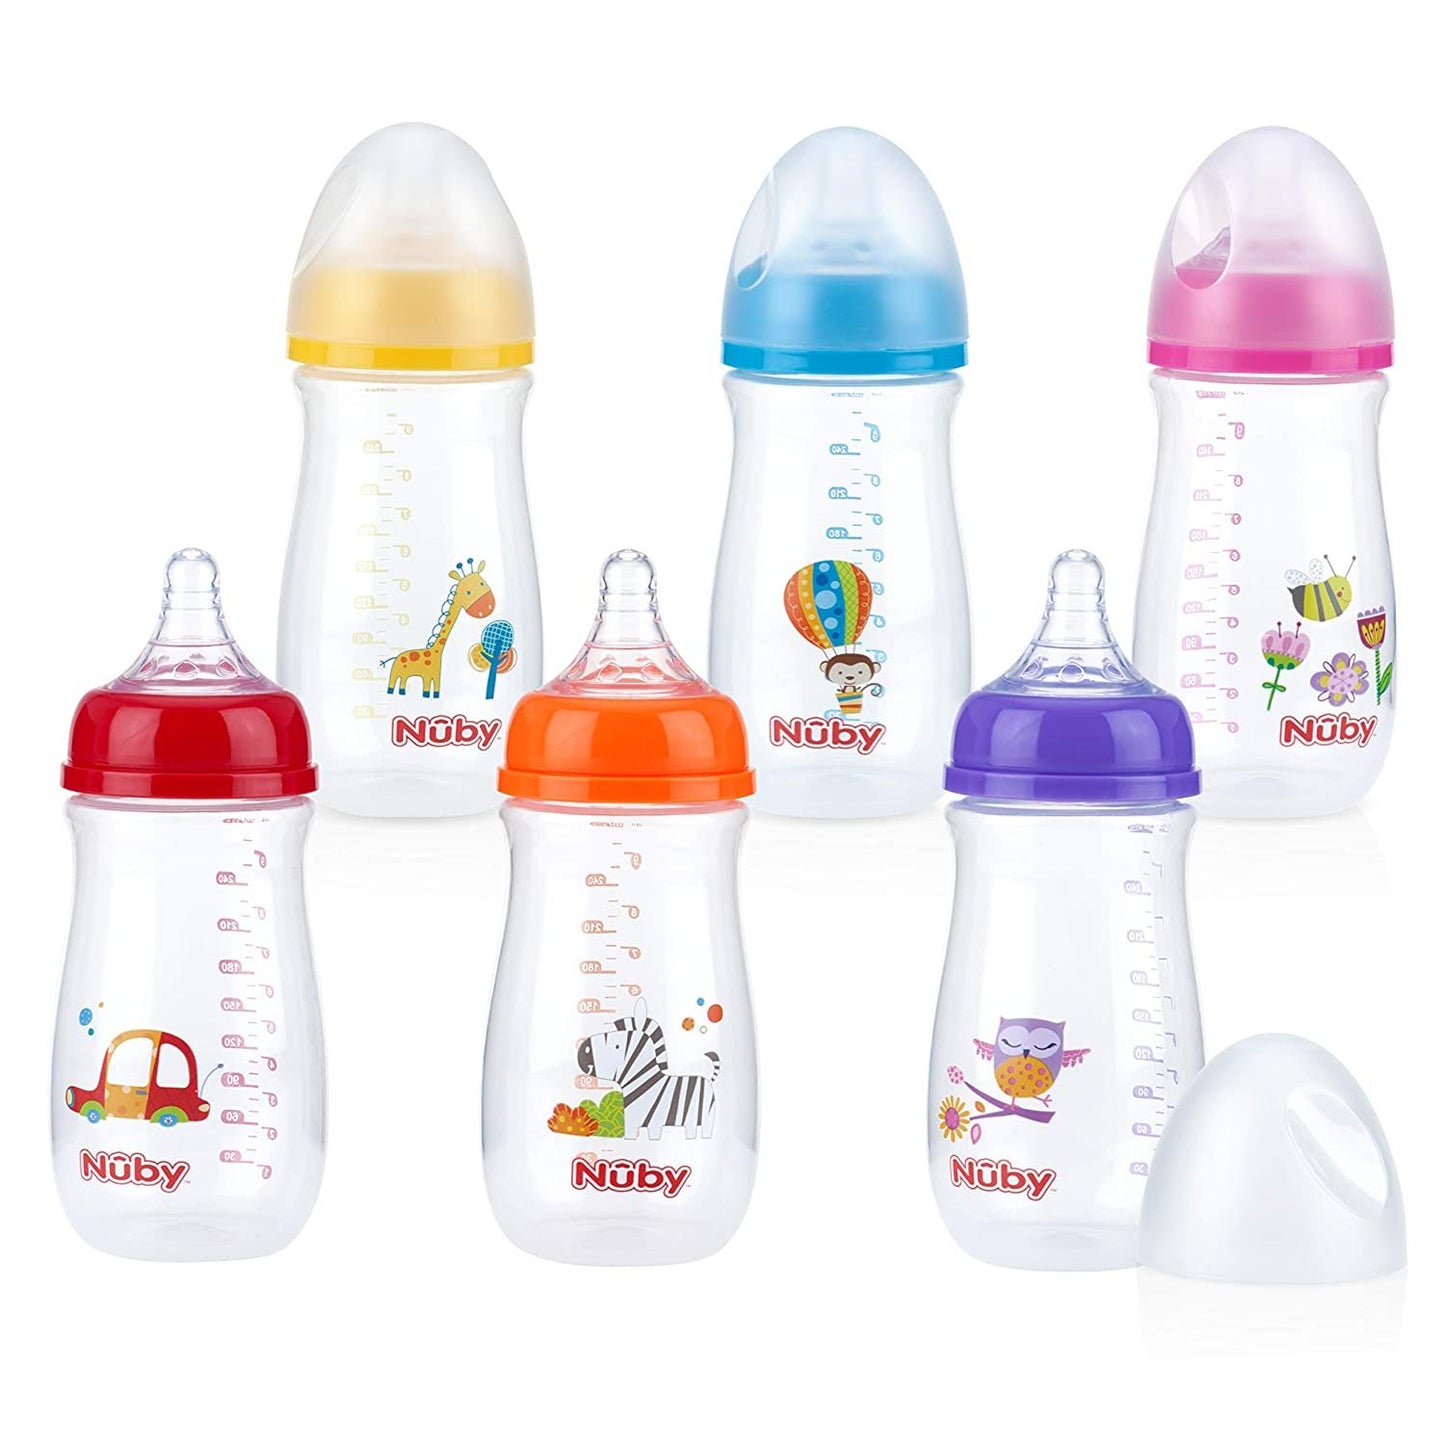 Nuby Wide Neck Bottle with Anti-Colic Air System, Colors/Prints May Vary, 1pk